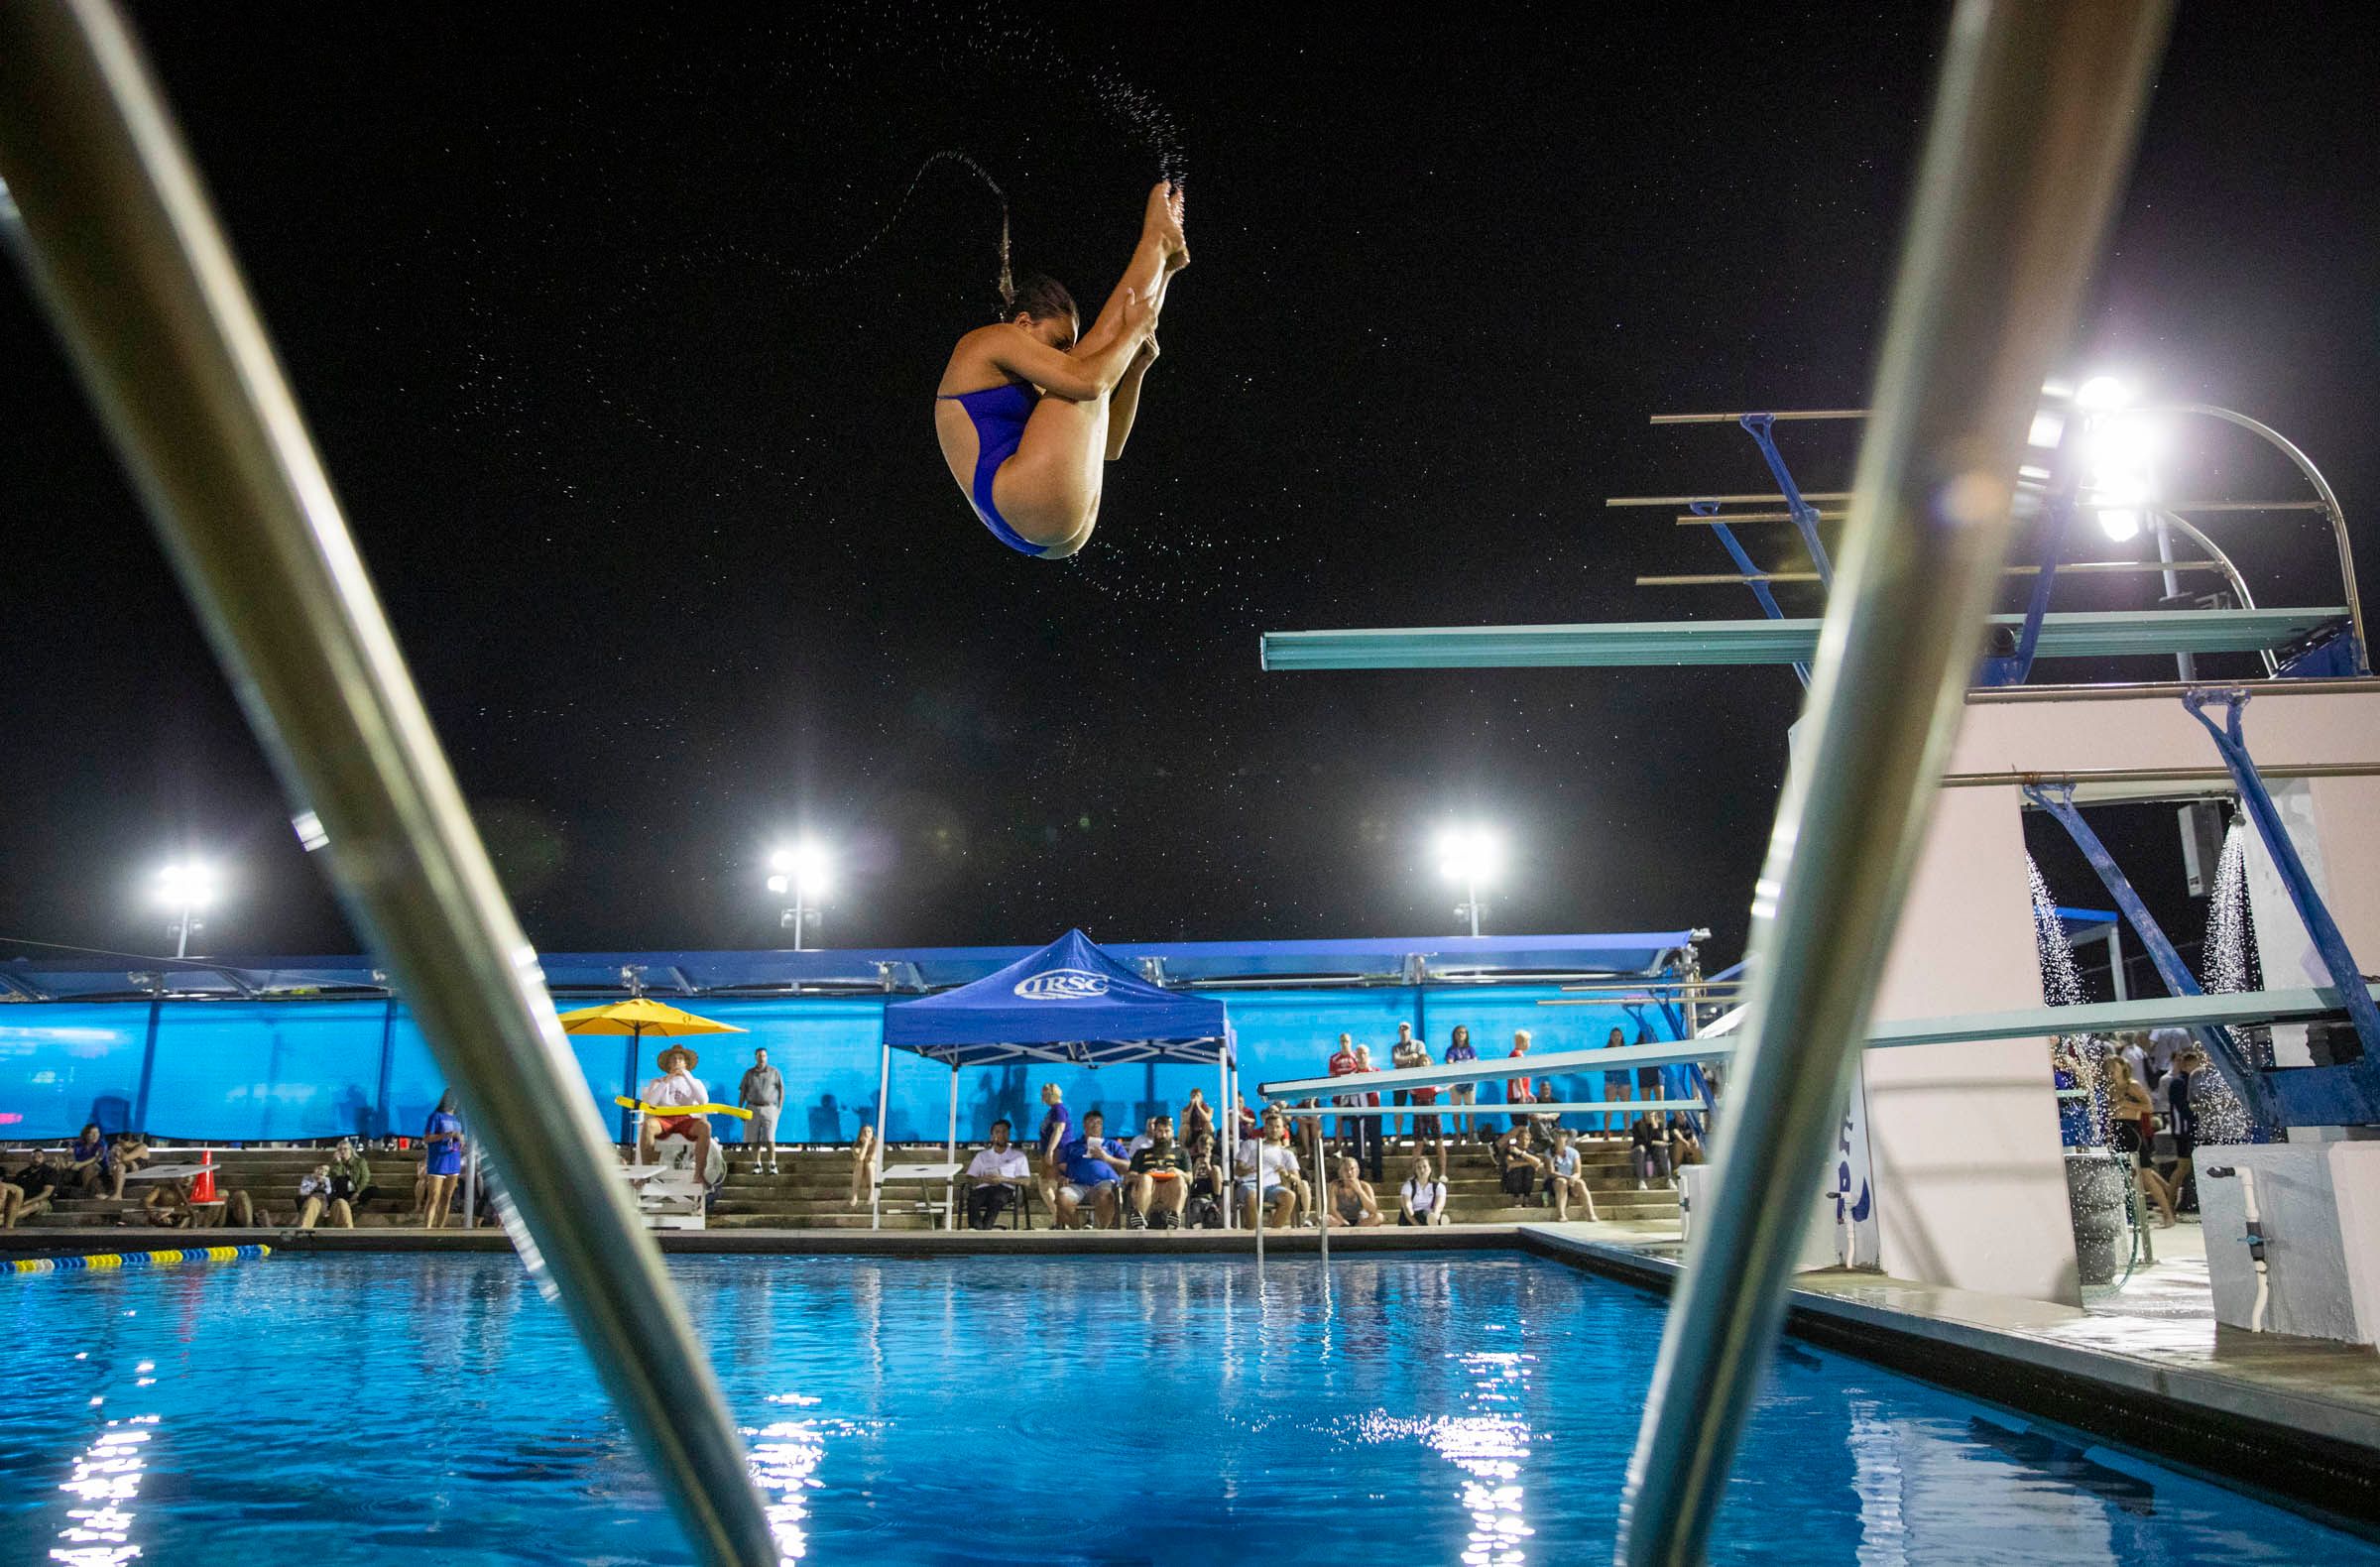 Diver in mid-air at Indian River State College pool.